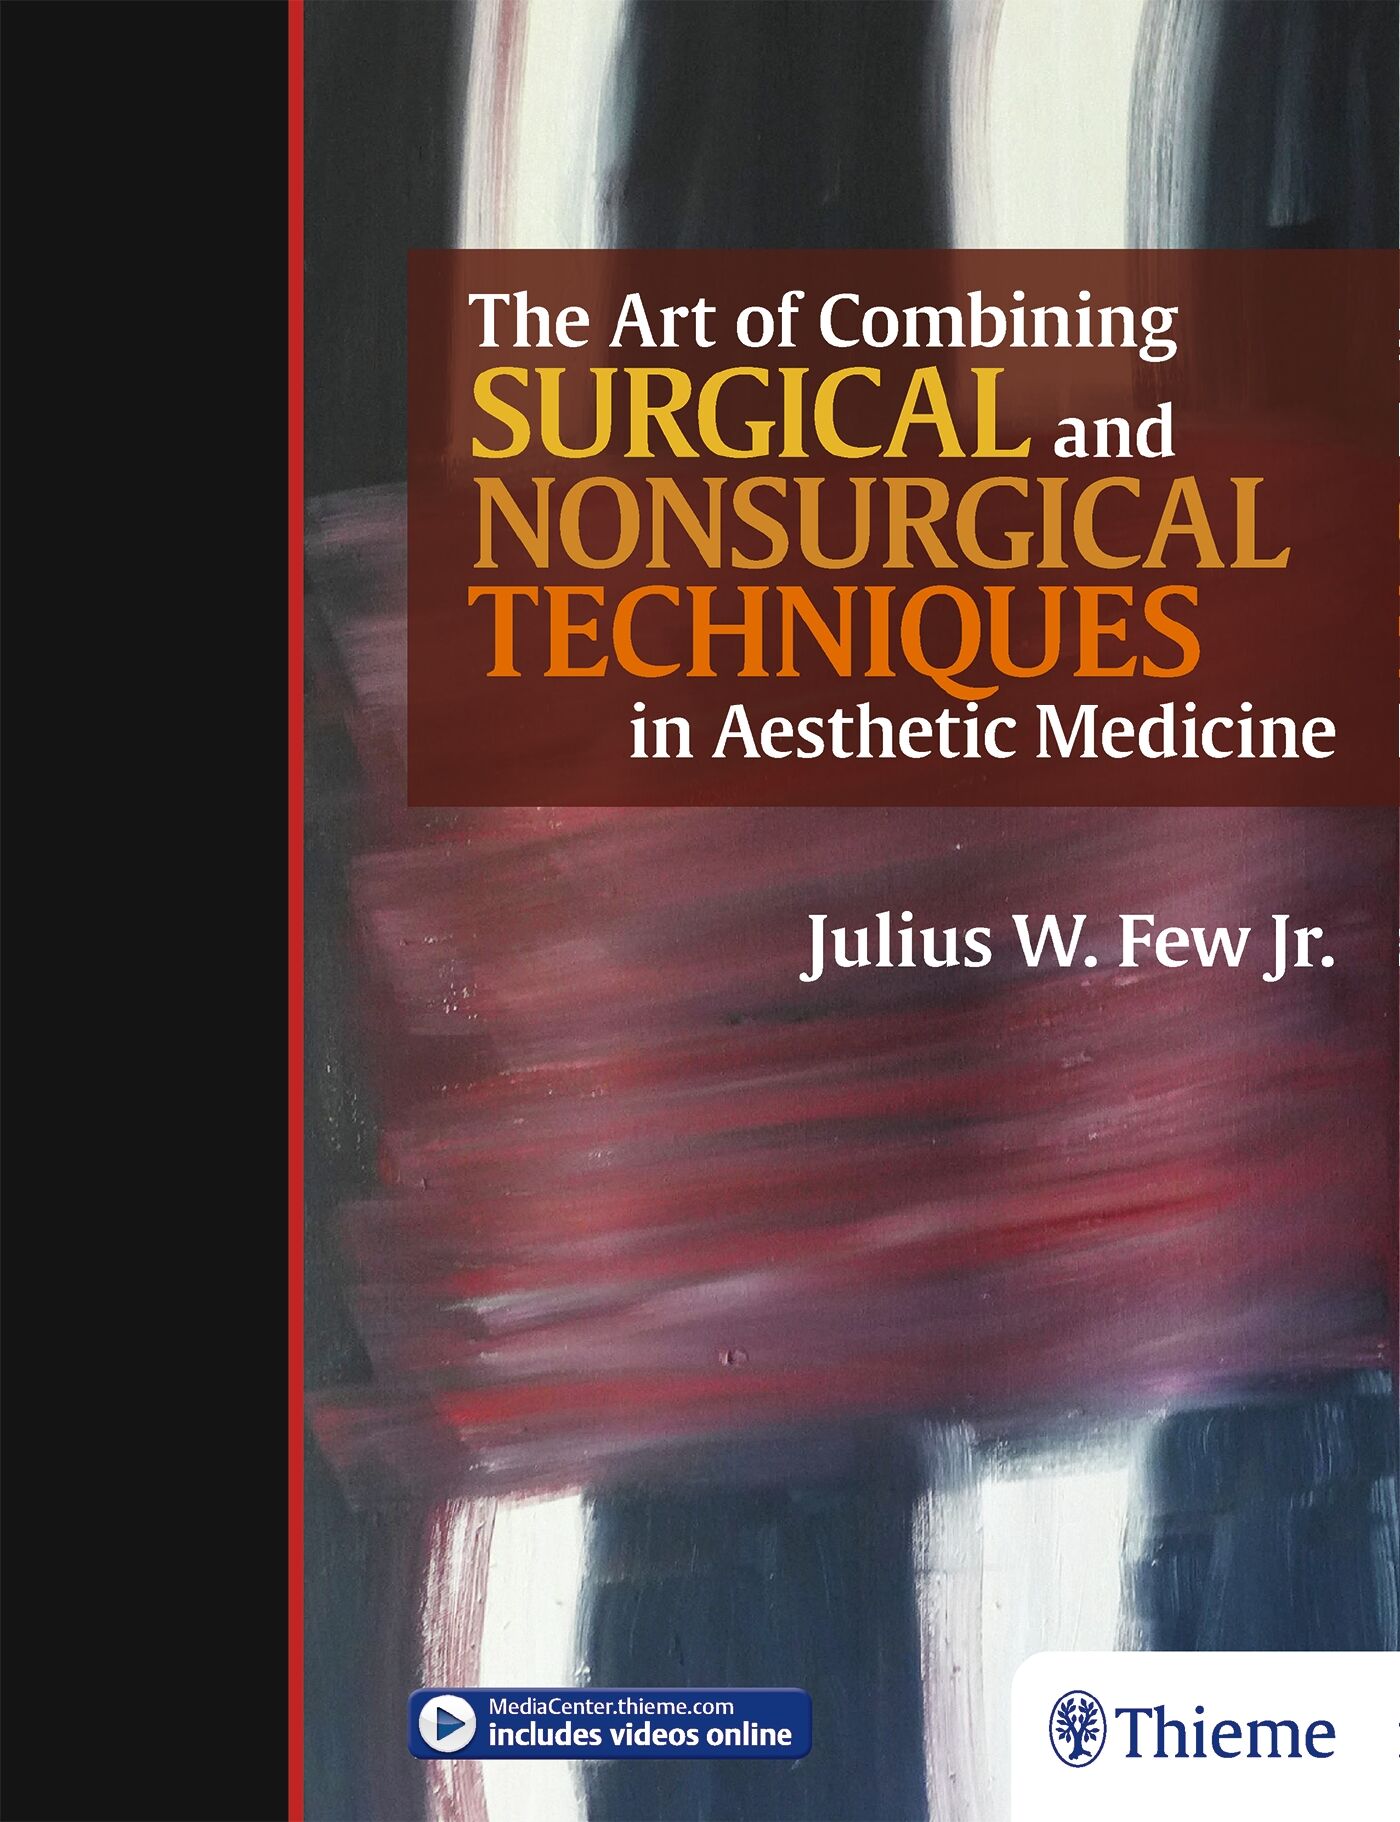 The Art of Combining Surgical and Nonsurgical Techniques in Aesthetic Medicine, 9781626236820